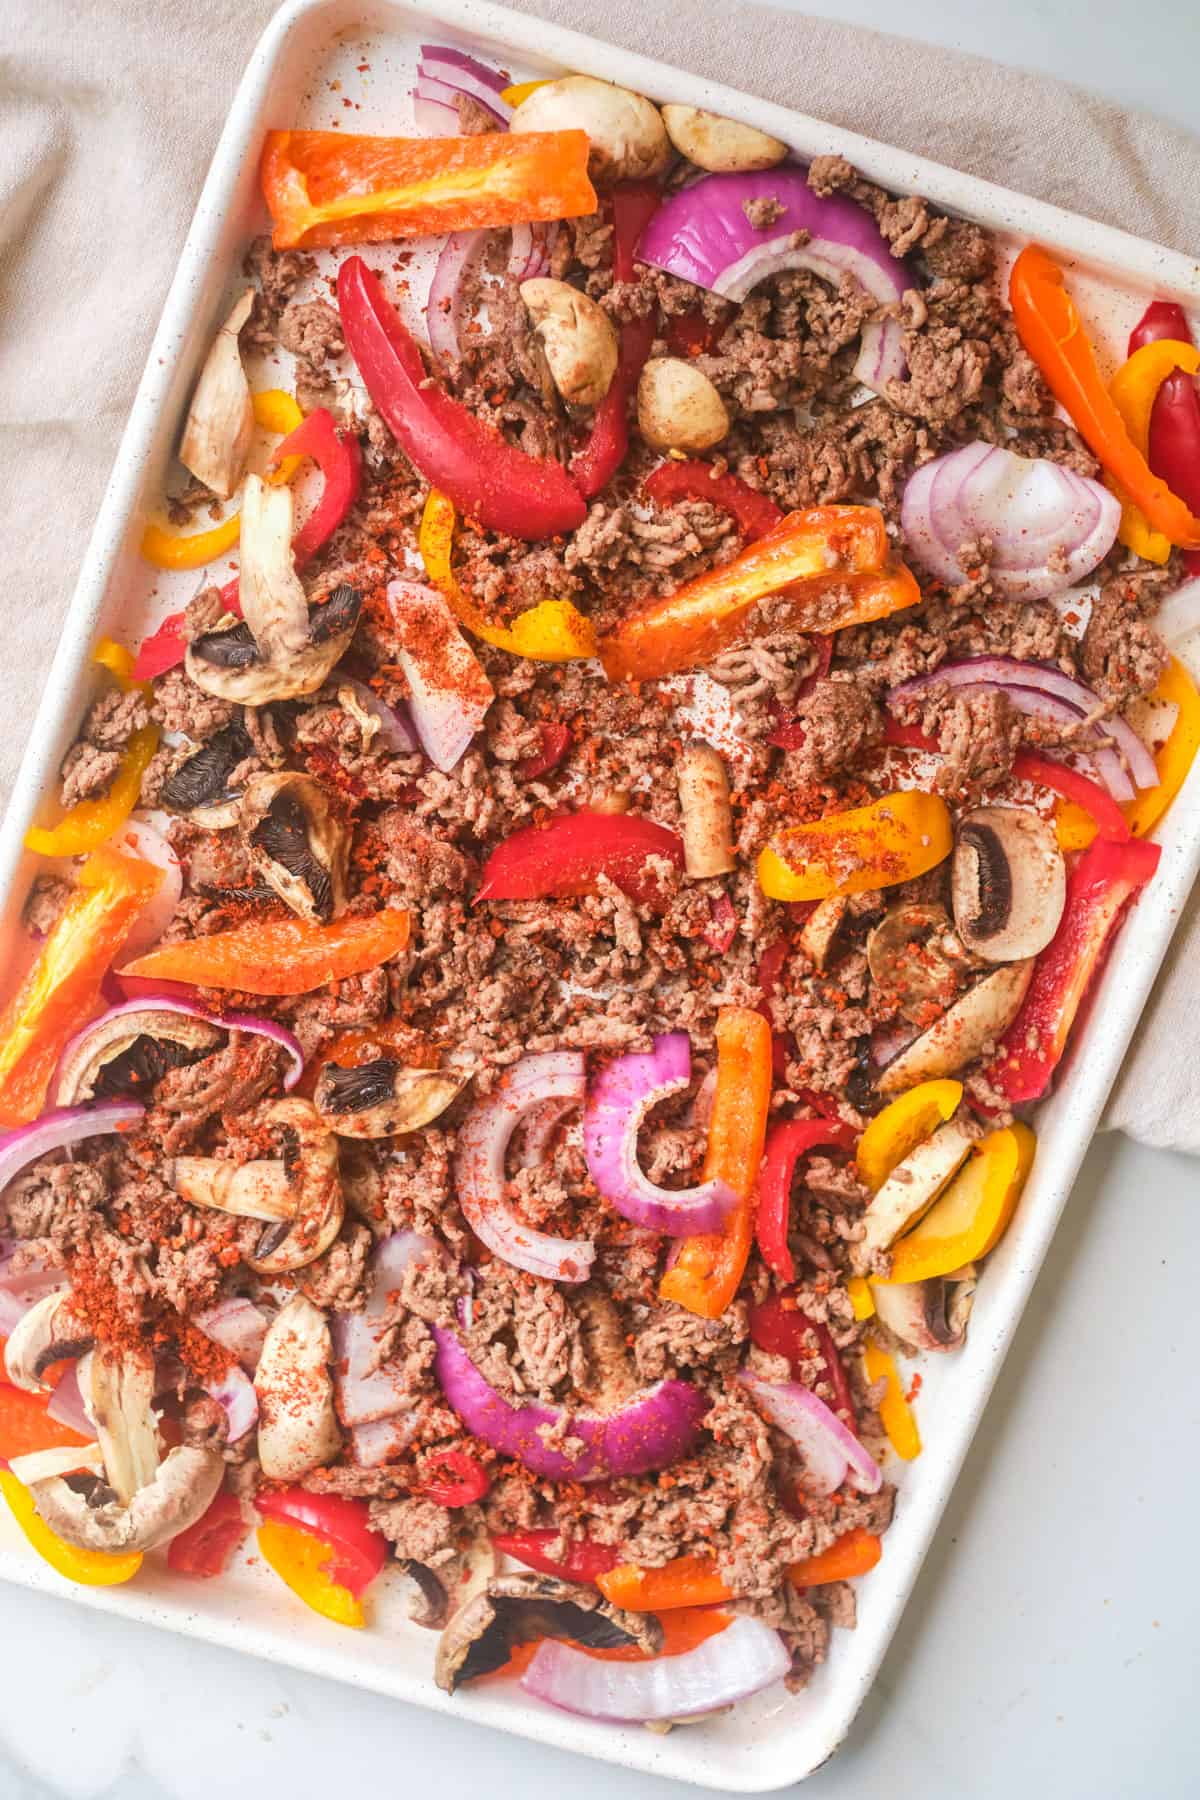 A sheet pan of ground beef and vegetables ready to be roasted.